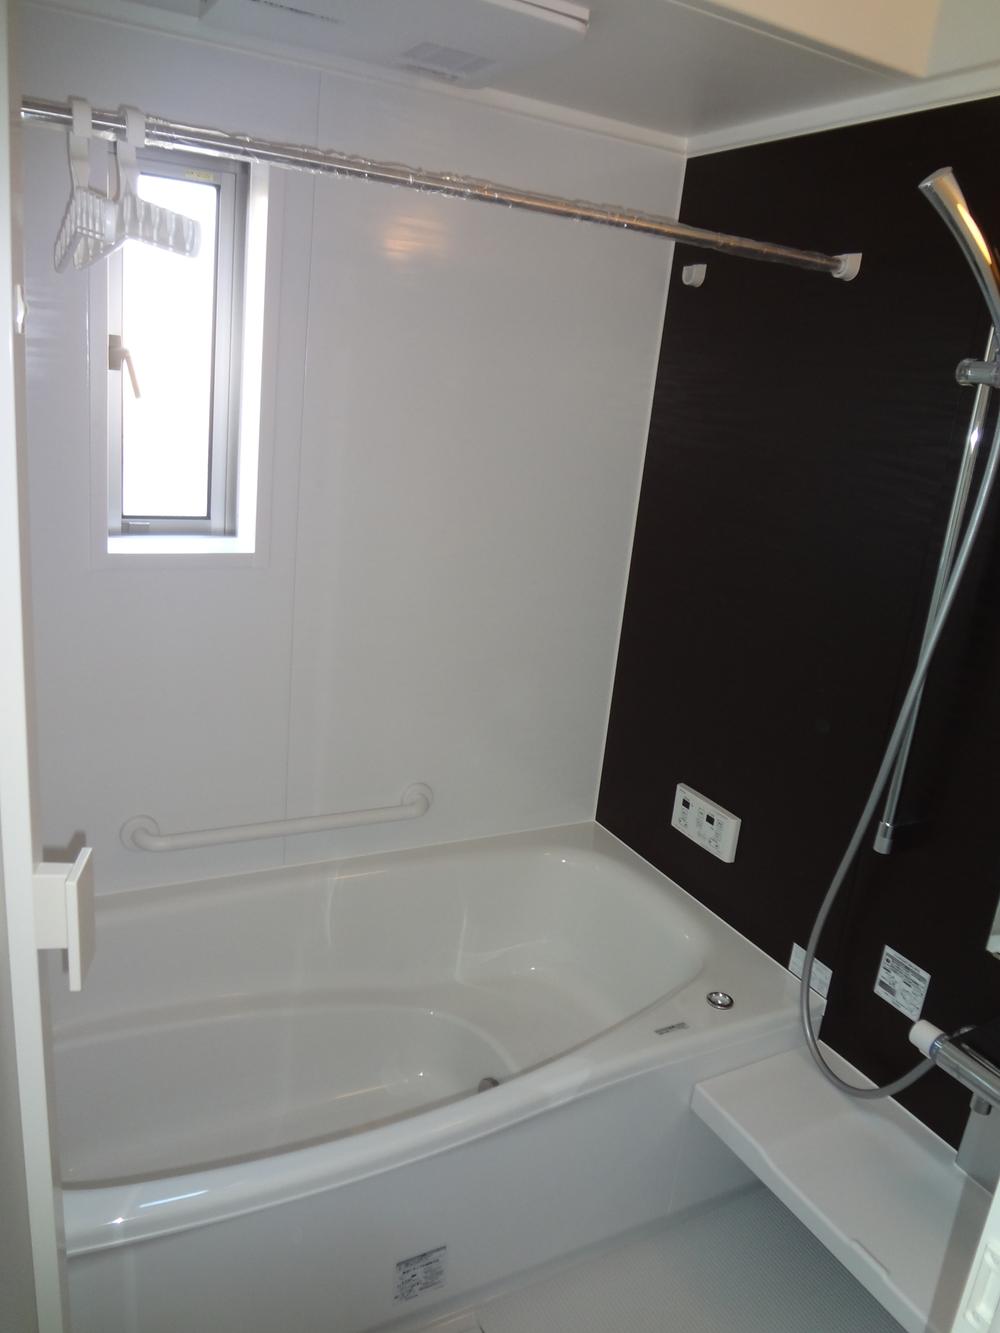 Same specifications photo (bathroom). 1 Building bathroom construction example photo  With bathroom ventilation drying function